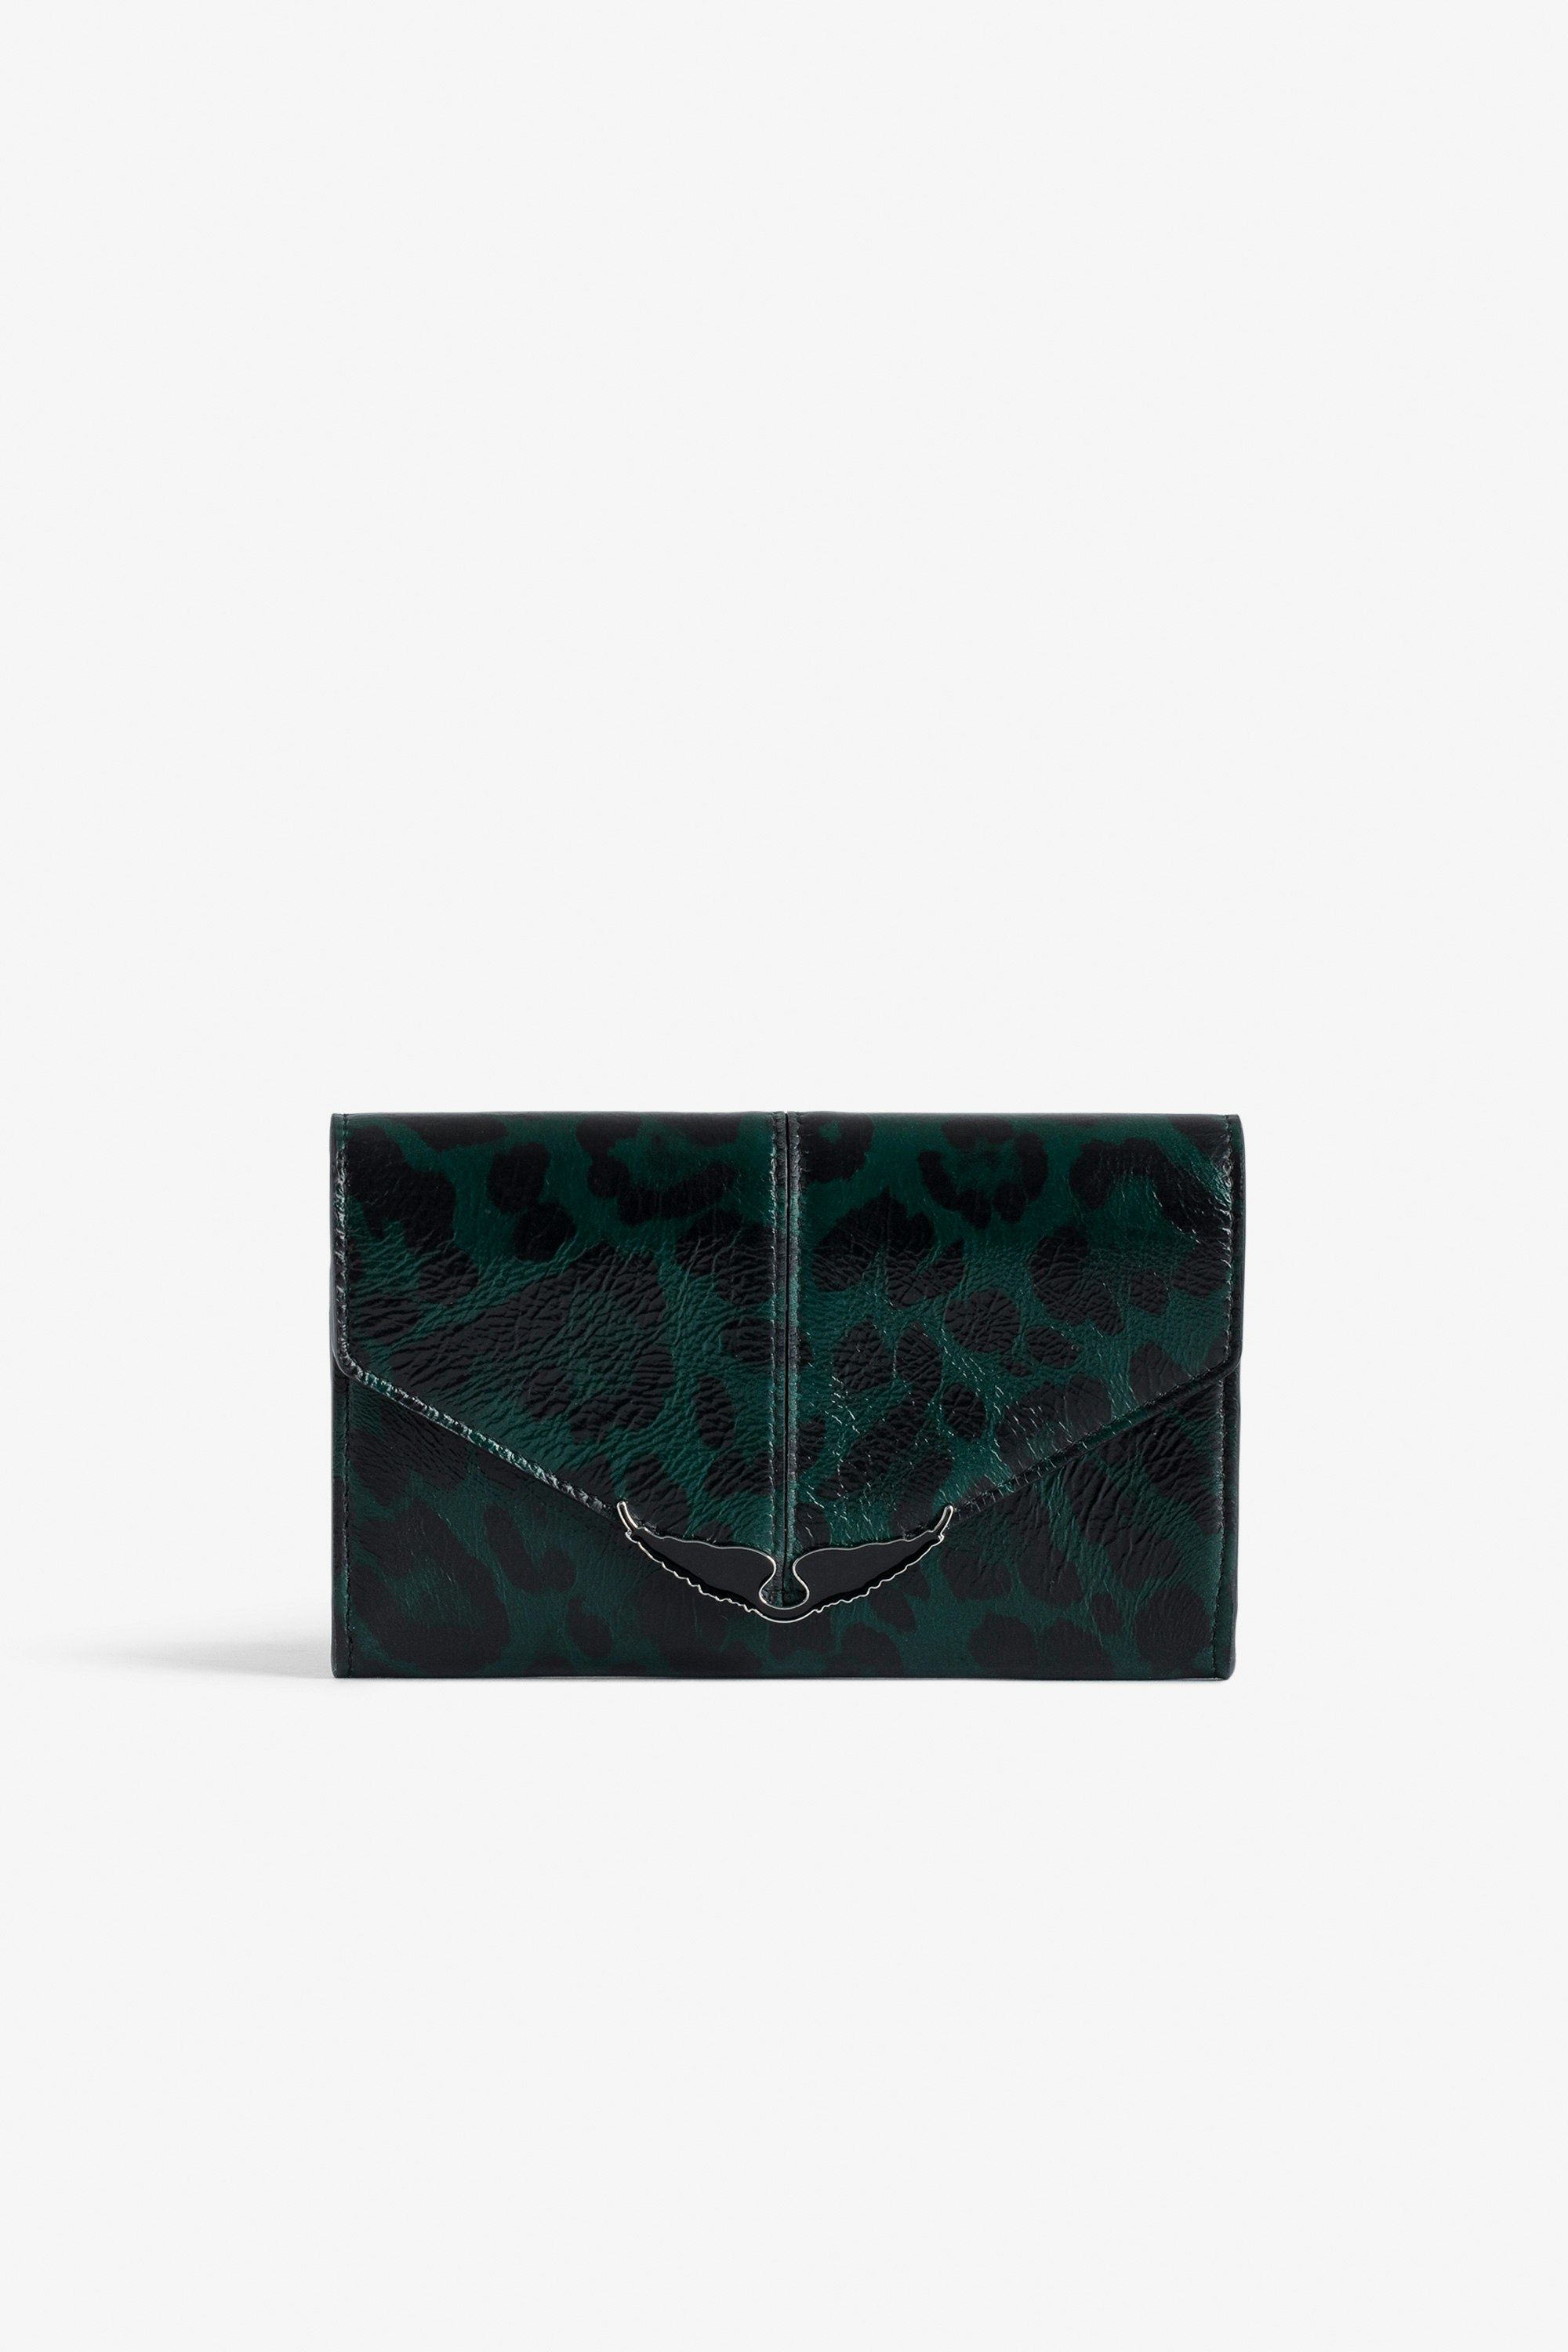 Borderline Wallet - Women’s green leopard-print patent leather wallet with wings charm.